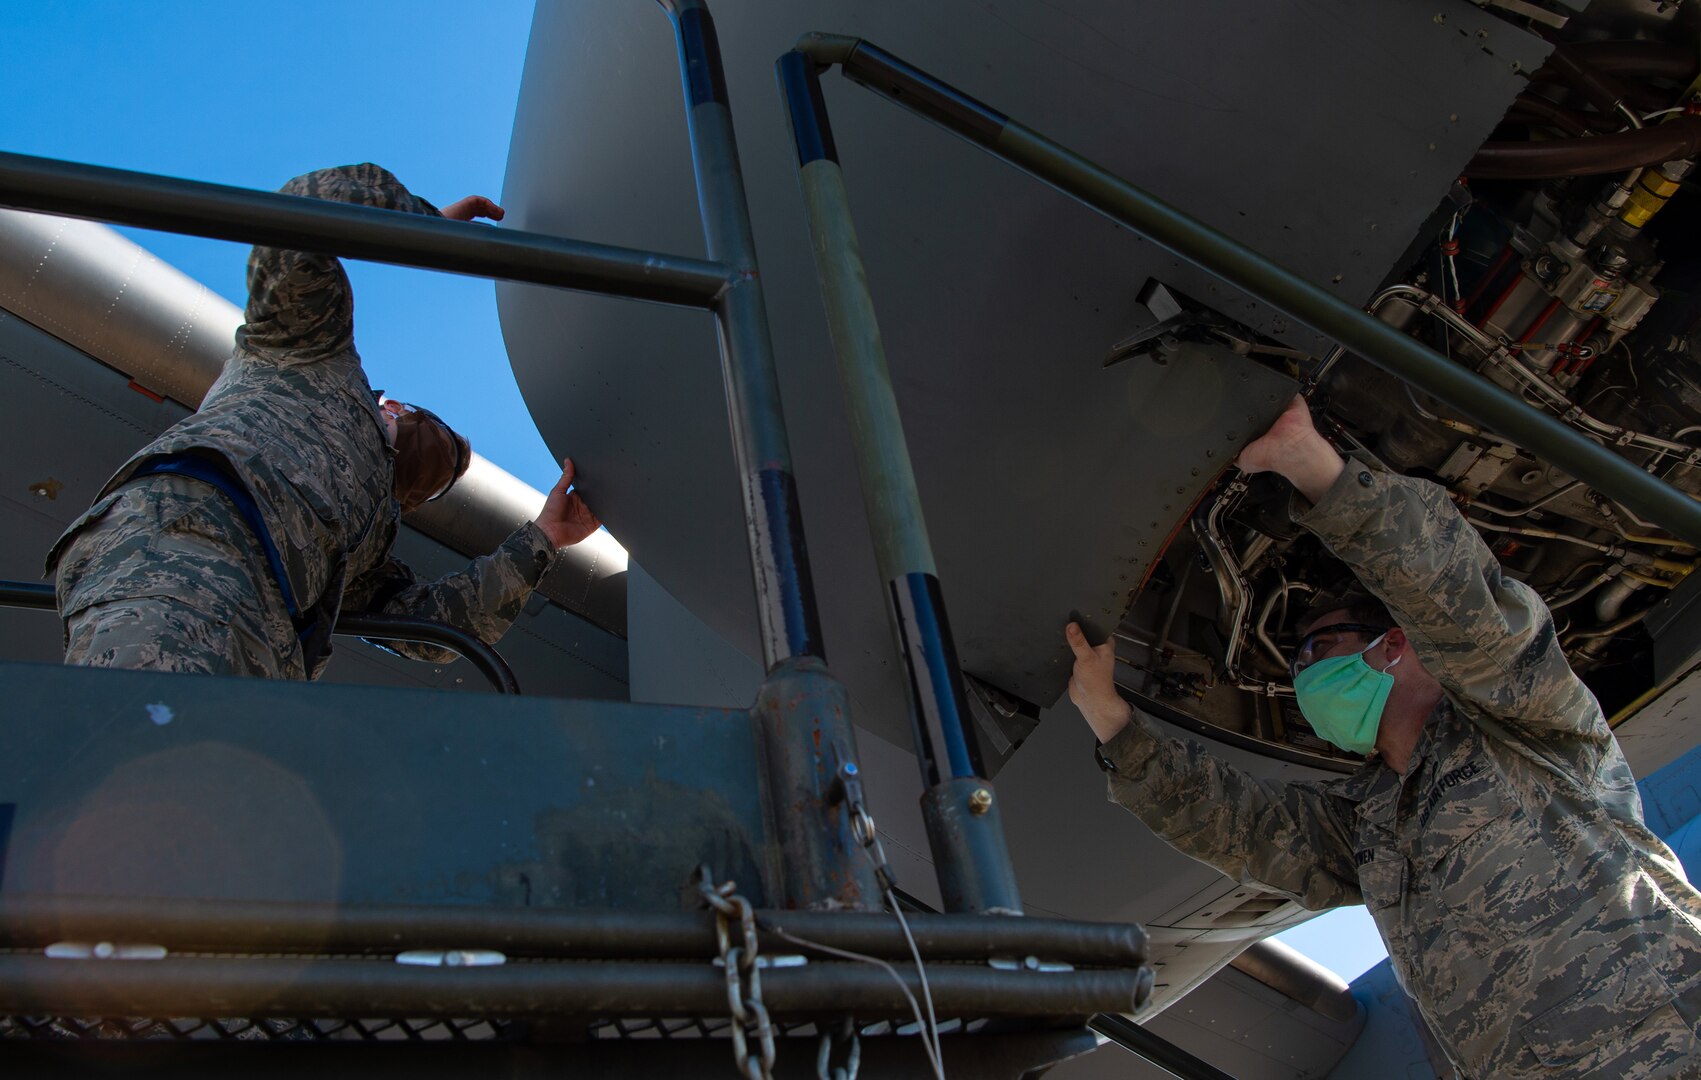 Staff Sgt. Christopher Bowen, 62nd Maintenance Squadron (MXS) hydraulics technician, right, and Airman 1st Class Ian Cernetich, 62nd MXS hydraulics apprentice, open the panel covering the engine of a C-17 Globemaster III at Joint Base Lewis-McChord, Wash., April 14, 2020. Maintenance Airmen are mission essential and cannot be sent home to maintain social distancing during the COVID-19 pandemic, so they must take precautions such as wearing protective masks to stay healthy while continuing to execute their mission. (U.S. Air Force photo by Senior Airman Tryphena Mayhugh)